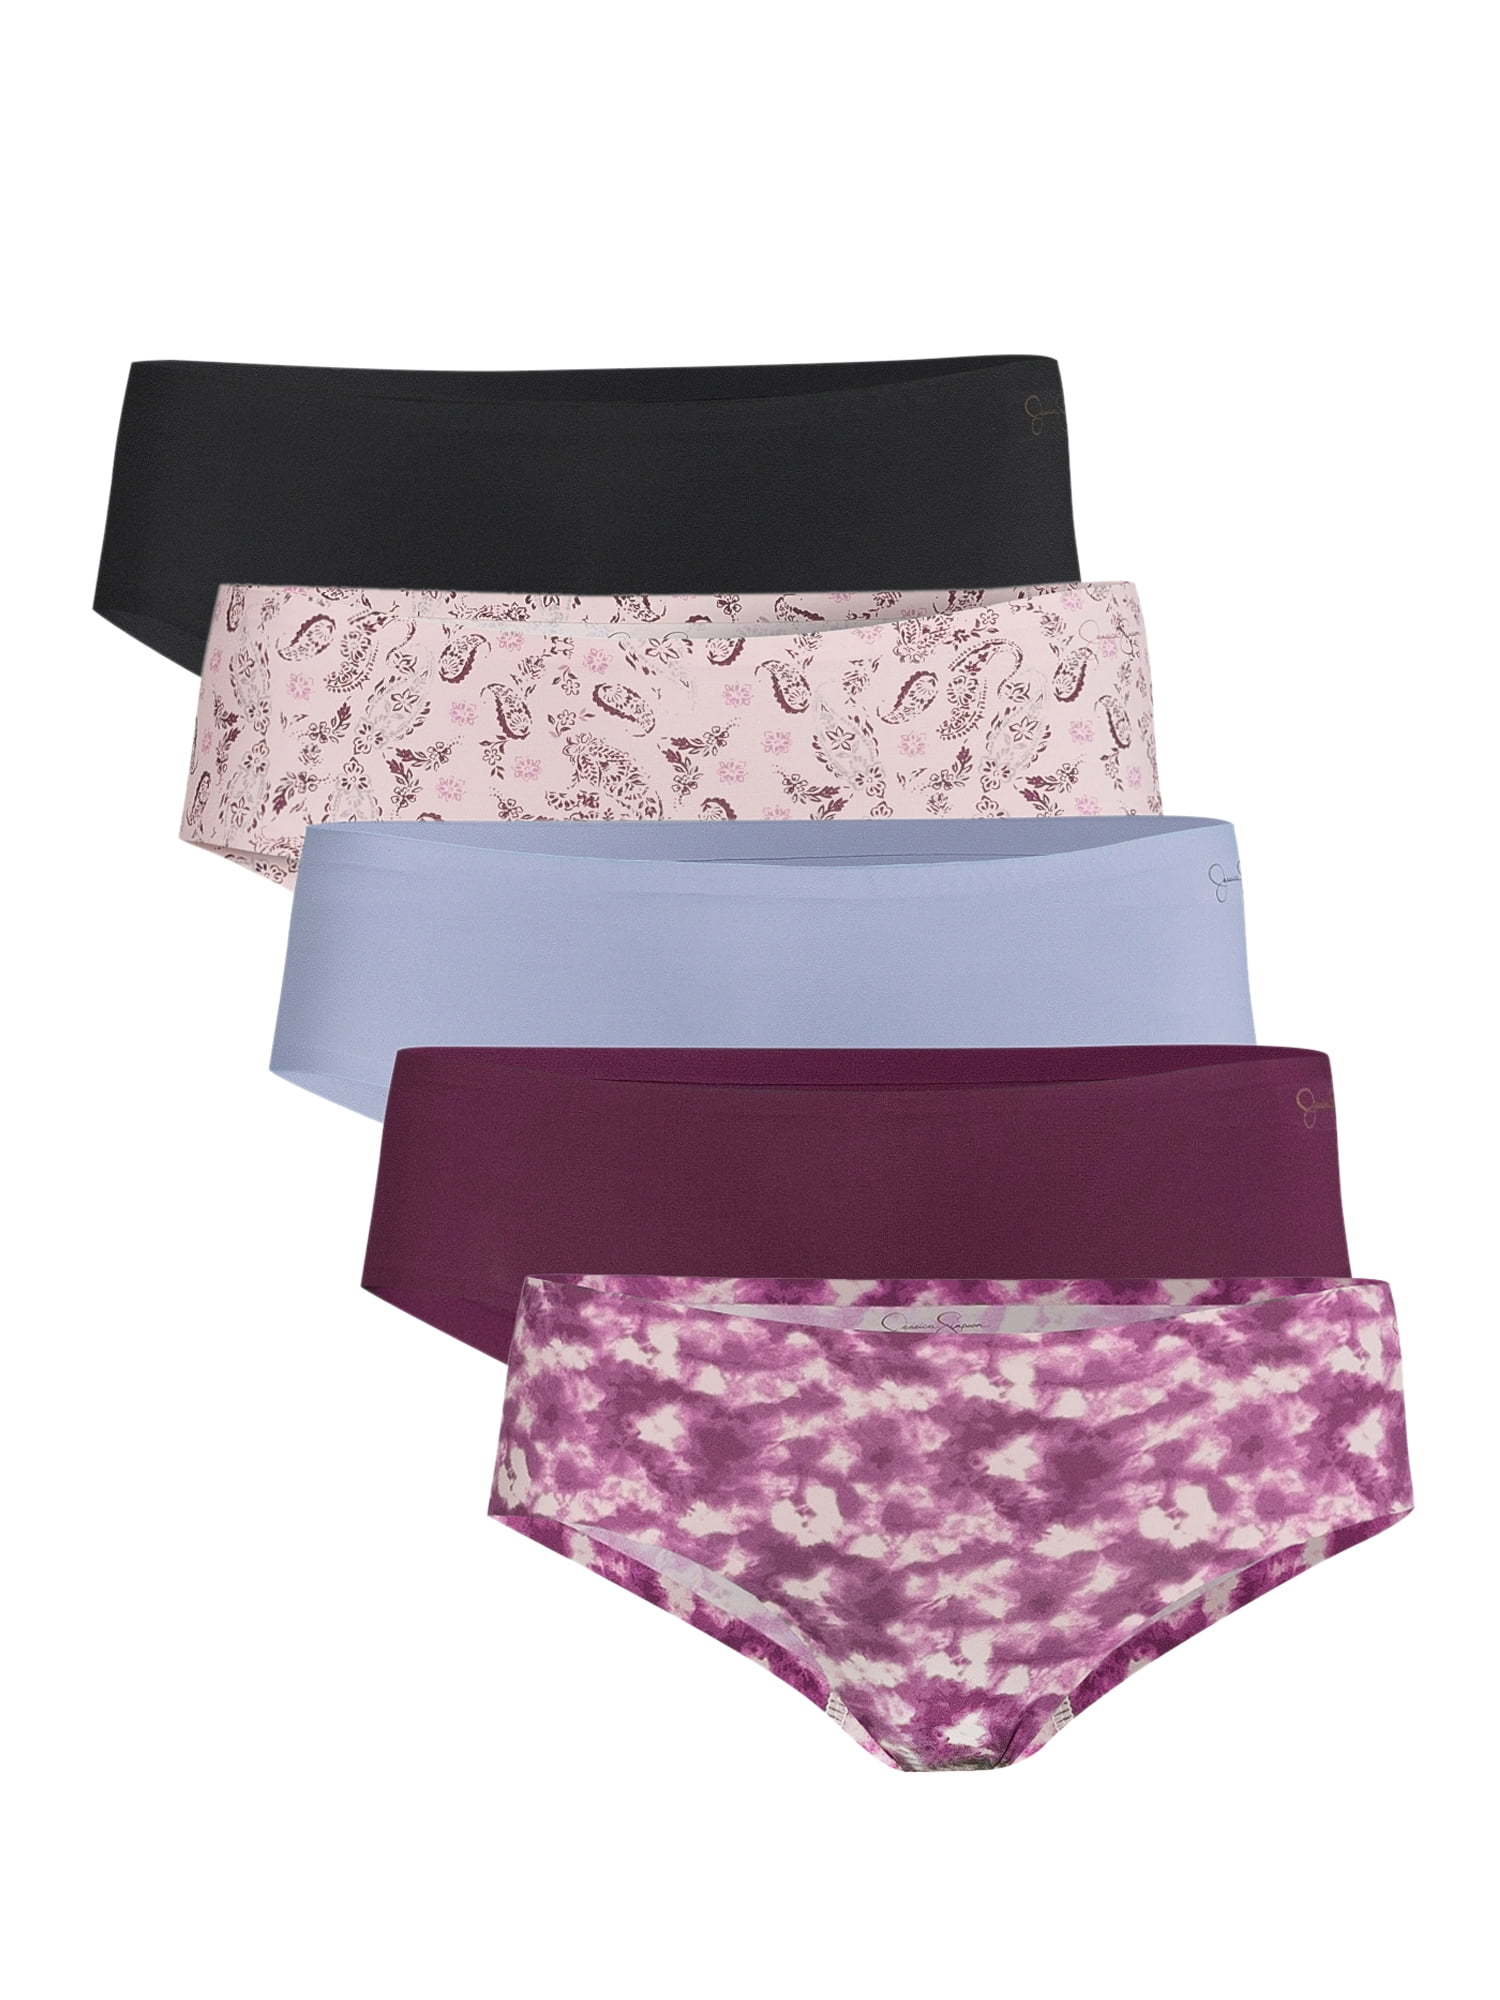 Jessica Simpson Women’s Lace Hipster Panties, 5-Pack